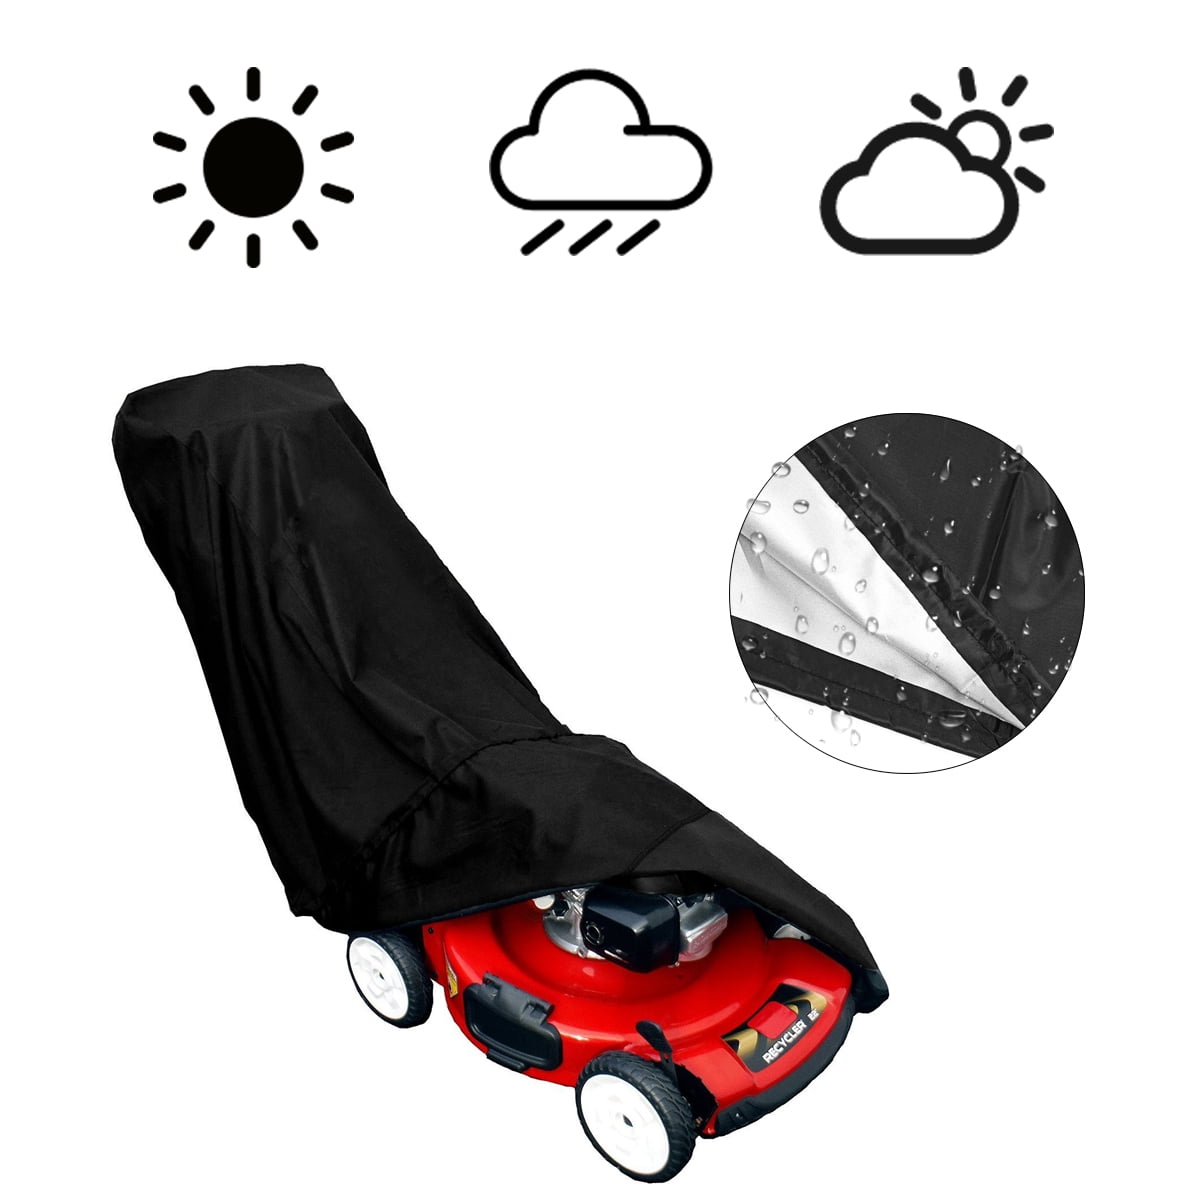 47 L x 32 H x 40 W, Black WOMACO Snow Thrower Cover Heavy Duty Waterproof Two Stage Snow Blowers Cover Snowblower Protector Shield for Universal Electric 2 Stage Snow Machine